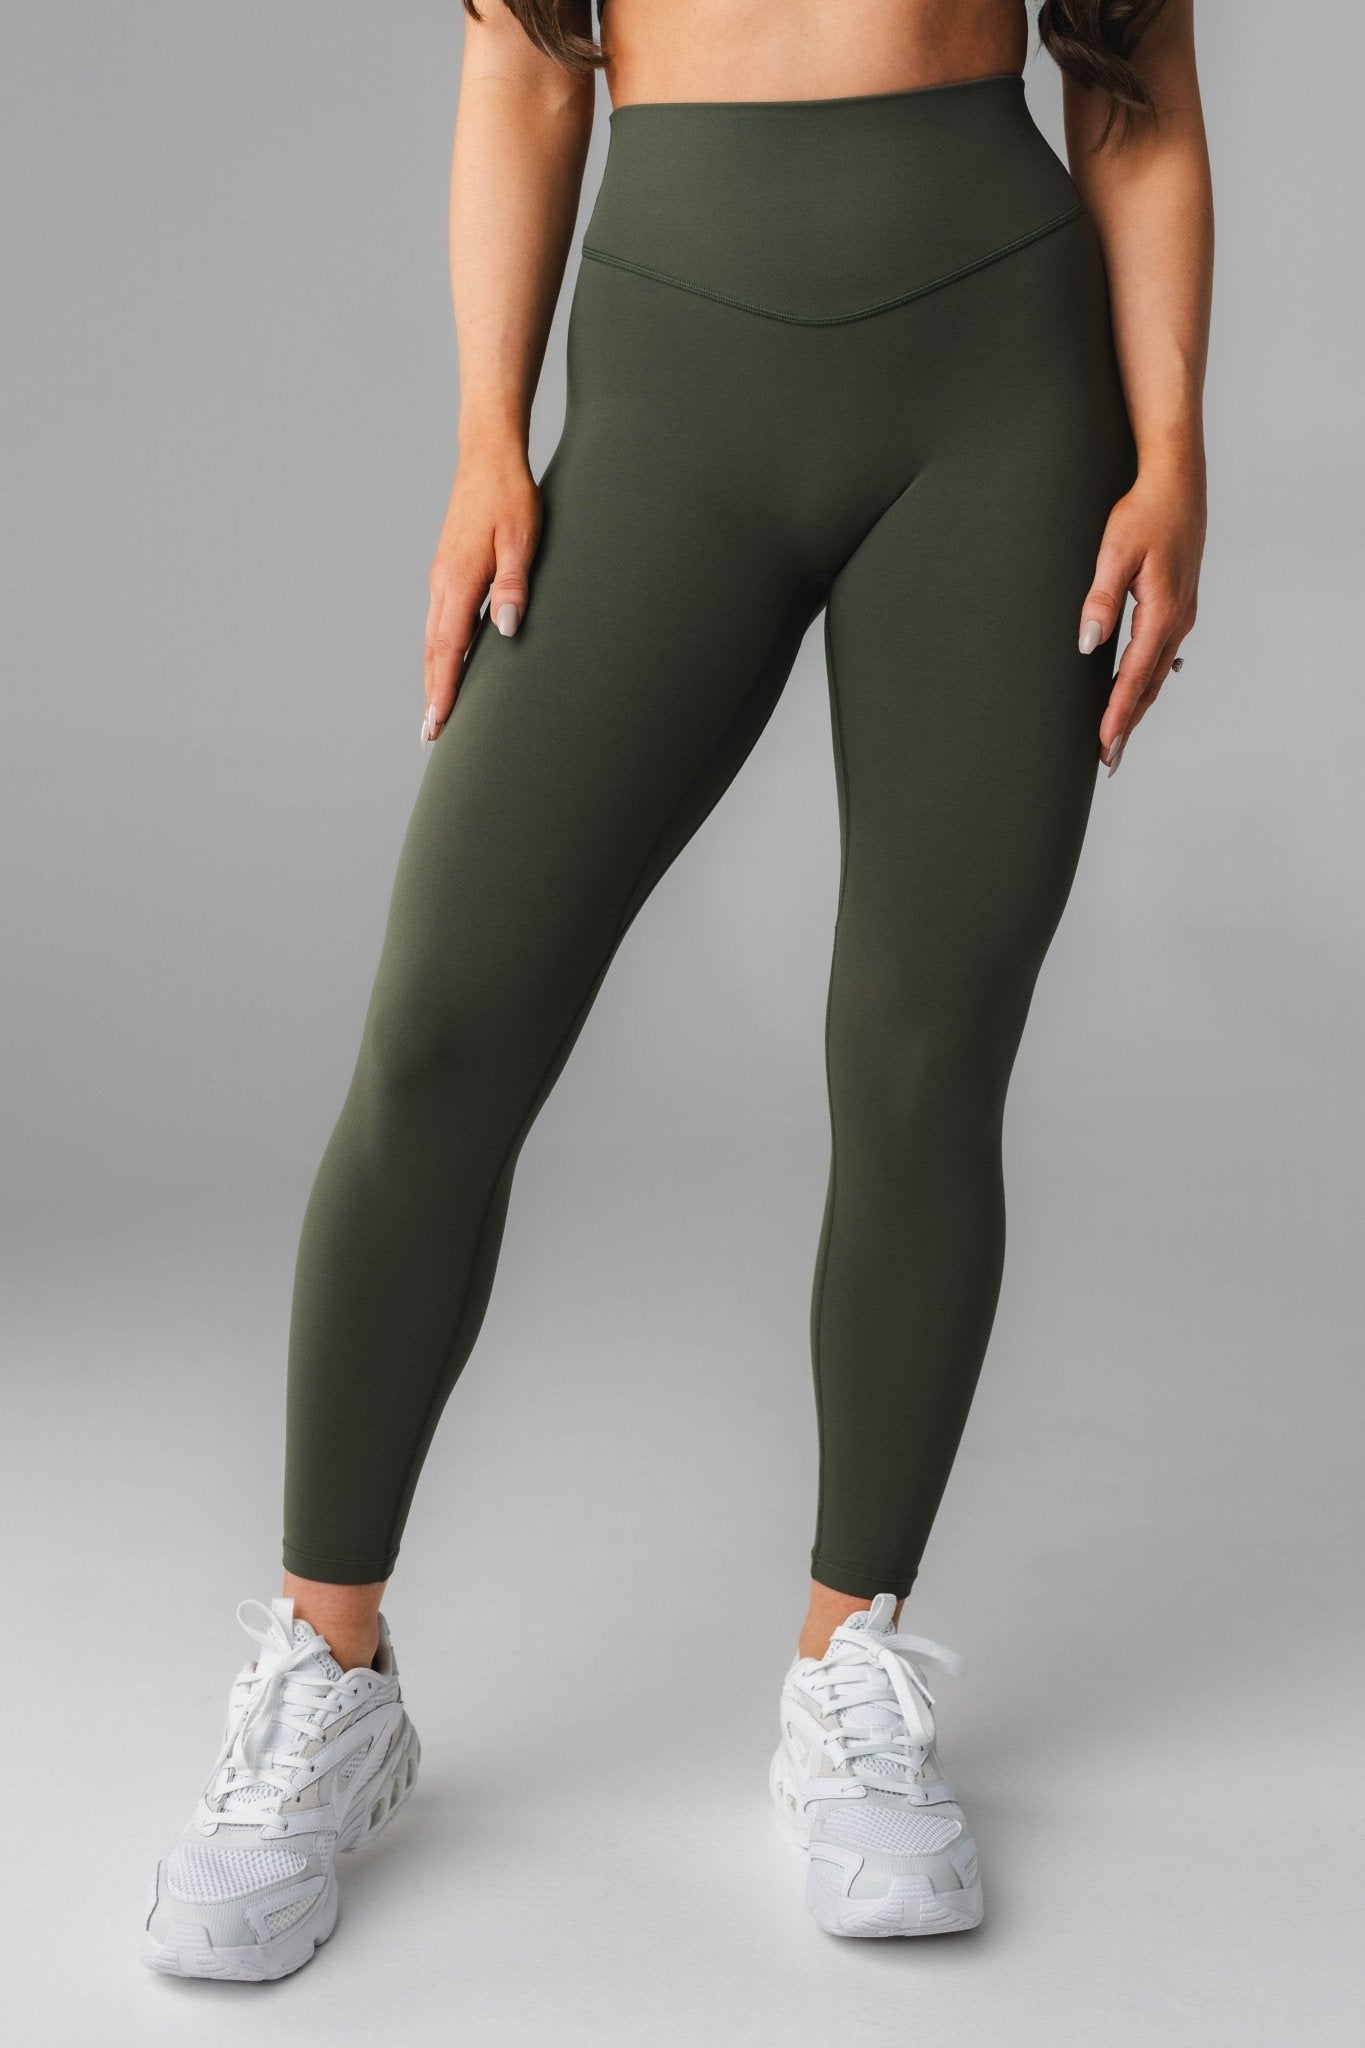 Olive Green Womens Tights | We Love Colors